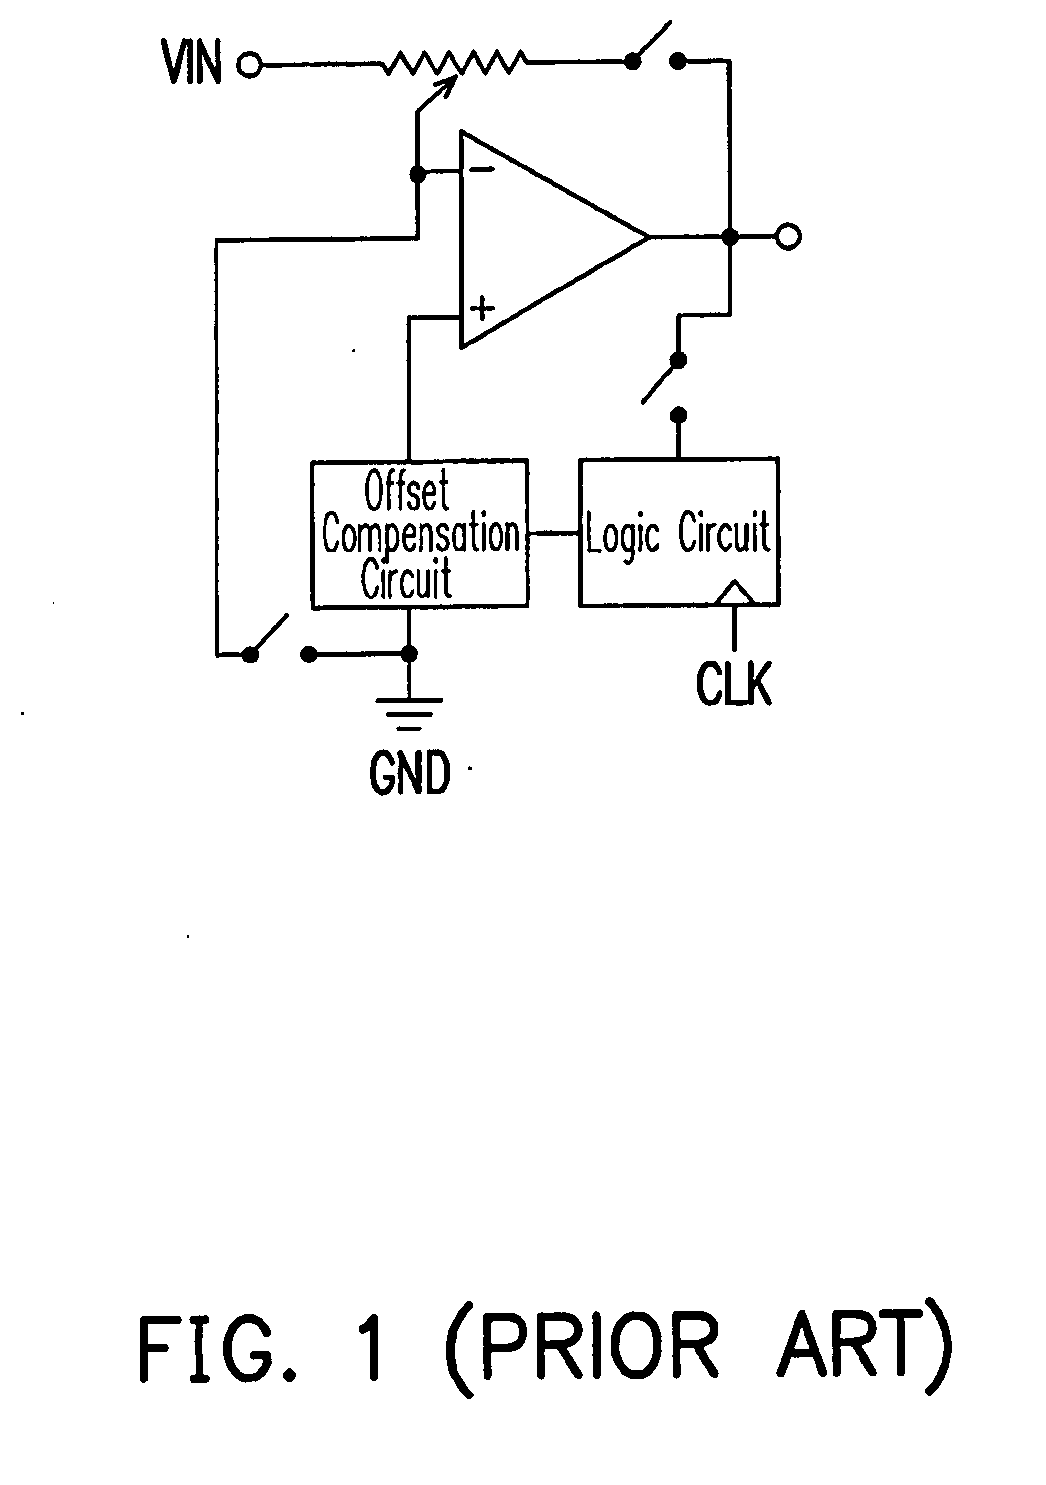 Analog-to-digital converter with calibration